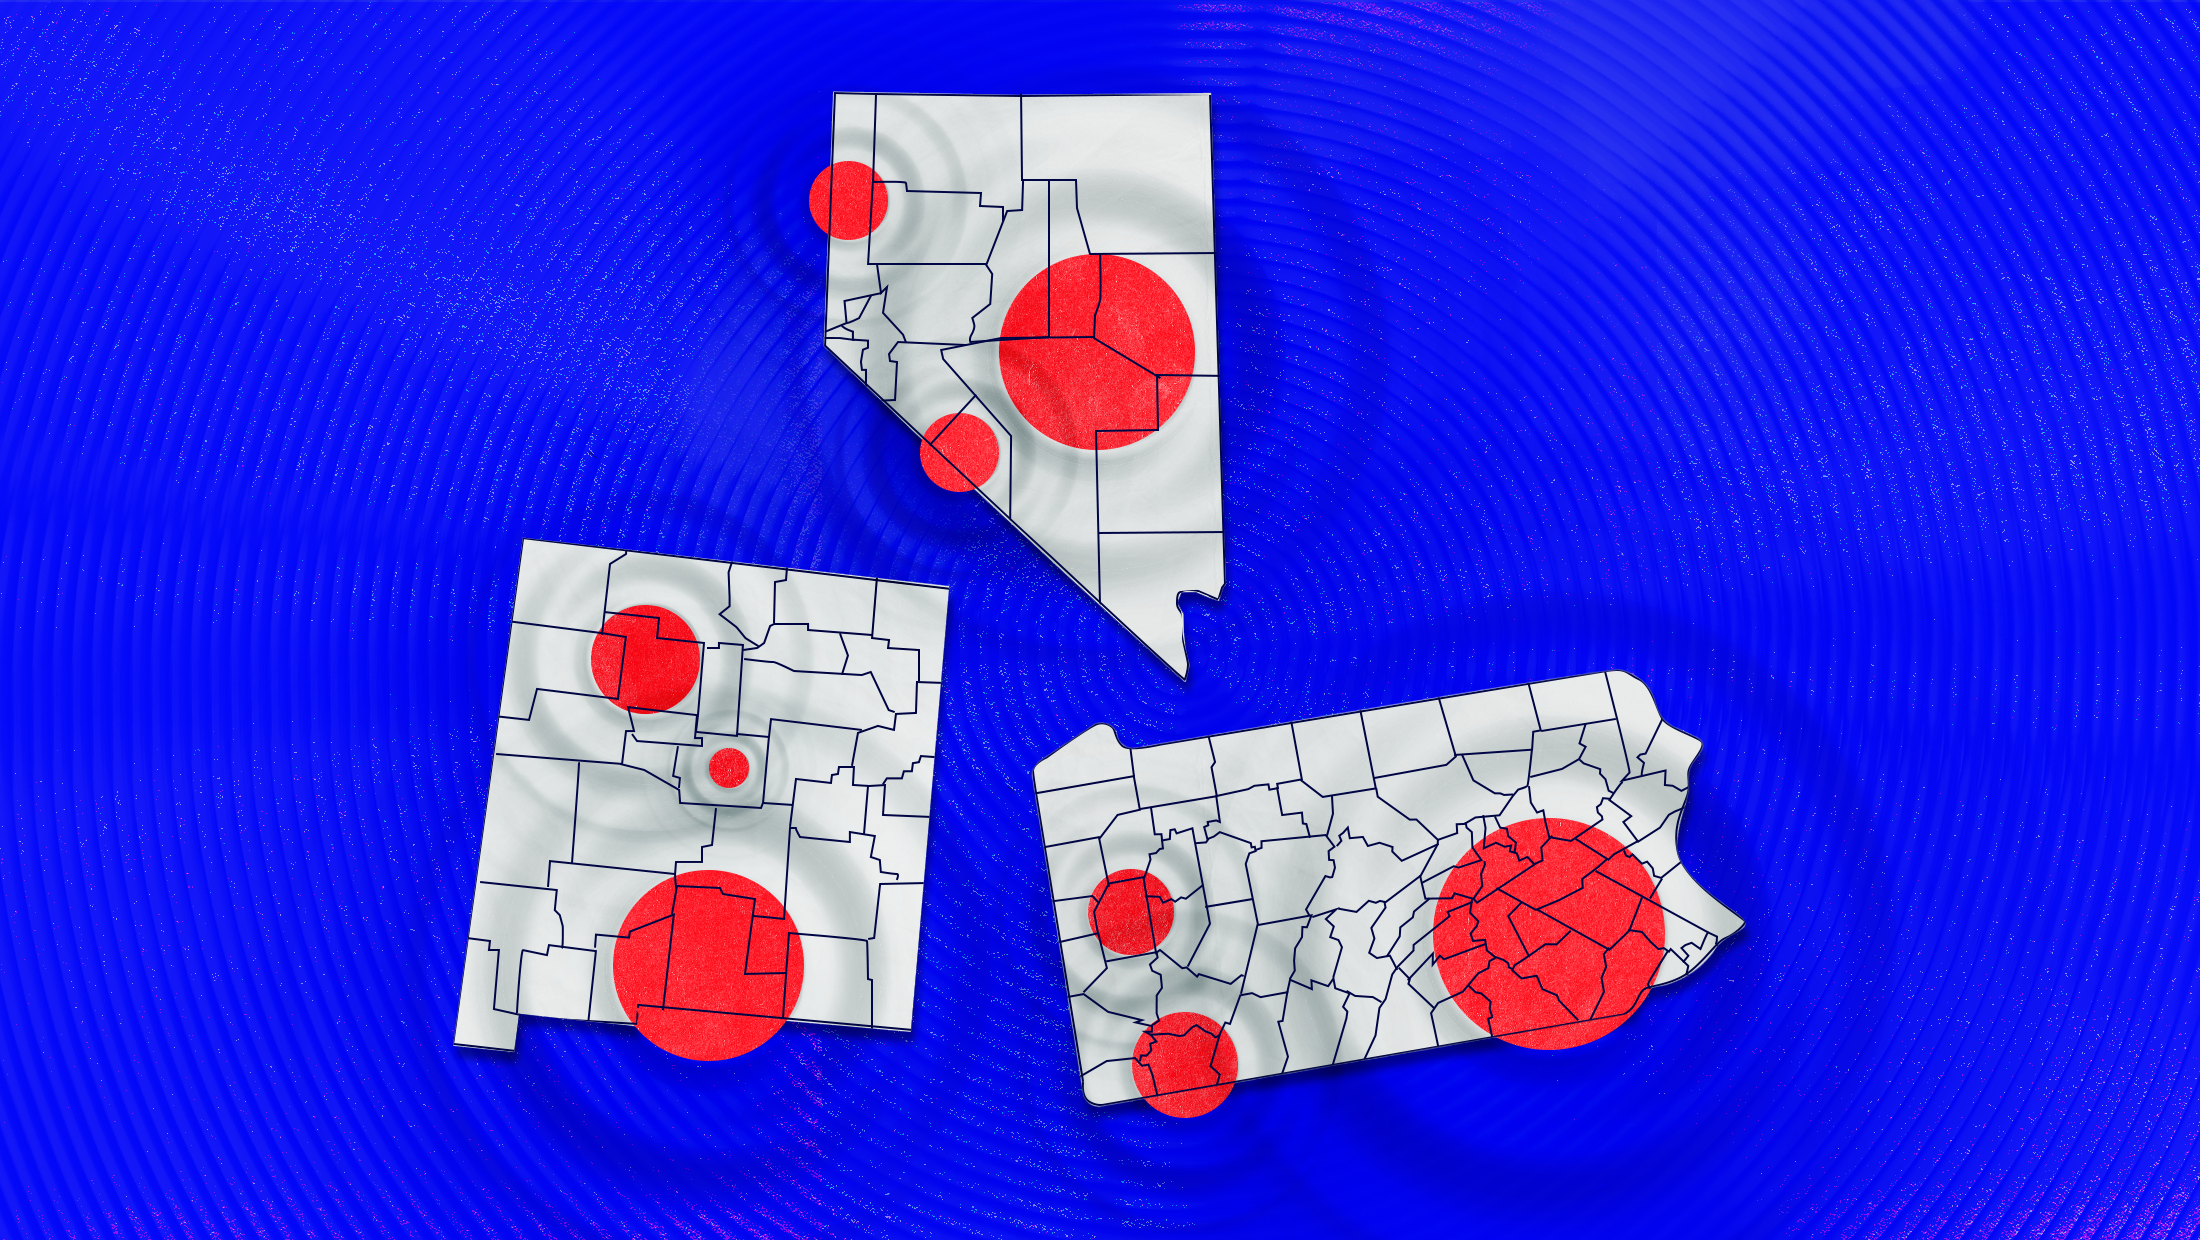 Maps of New Mexico, Nevada and Pennsylvania with county lines and red epicenters scattered throghout, on a blue background. Ripple effects from the red dots fade outwards.